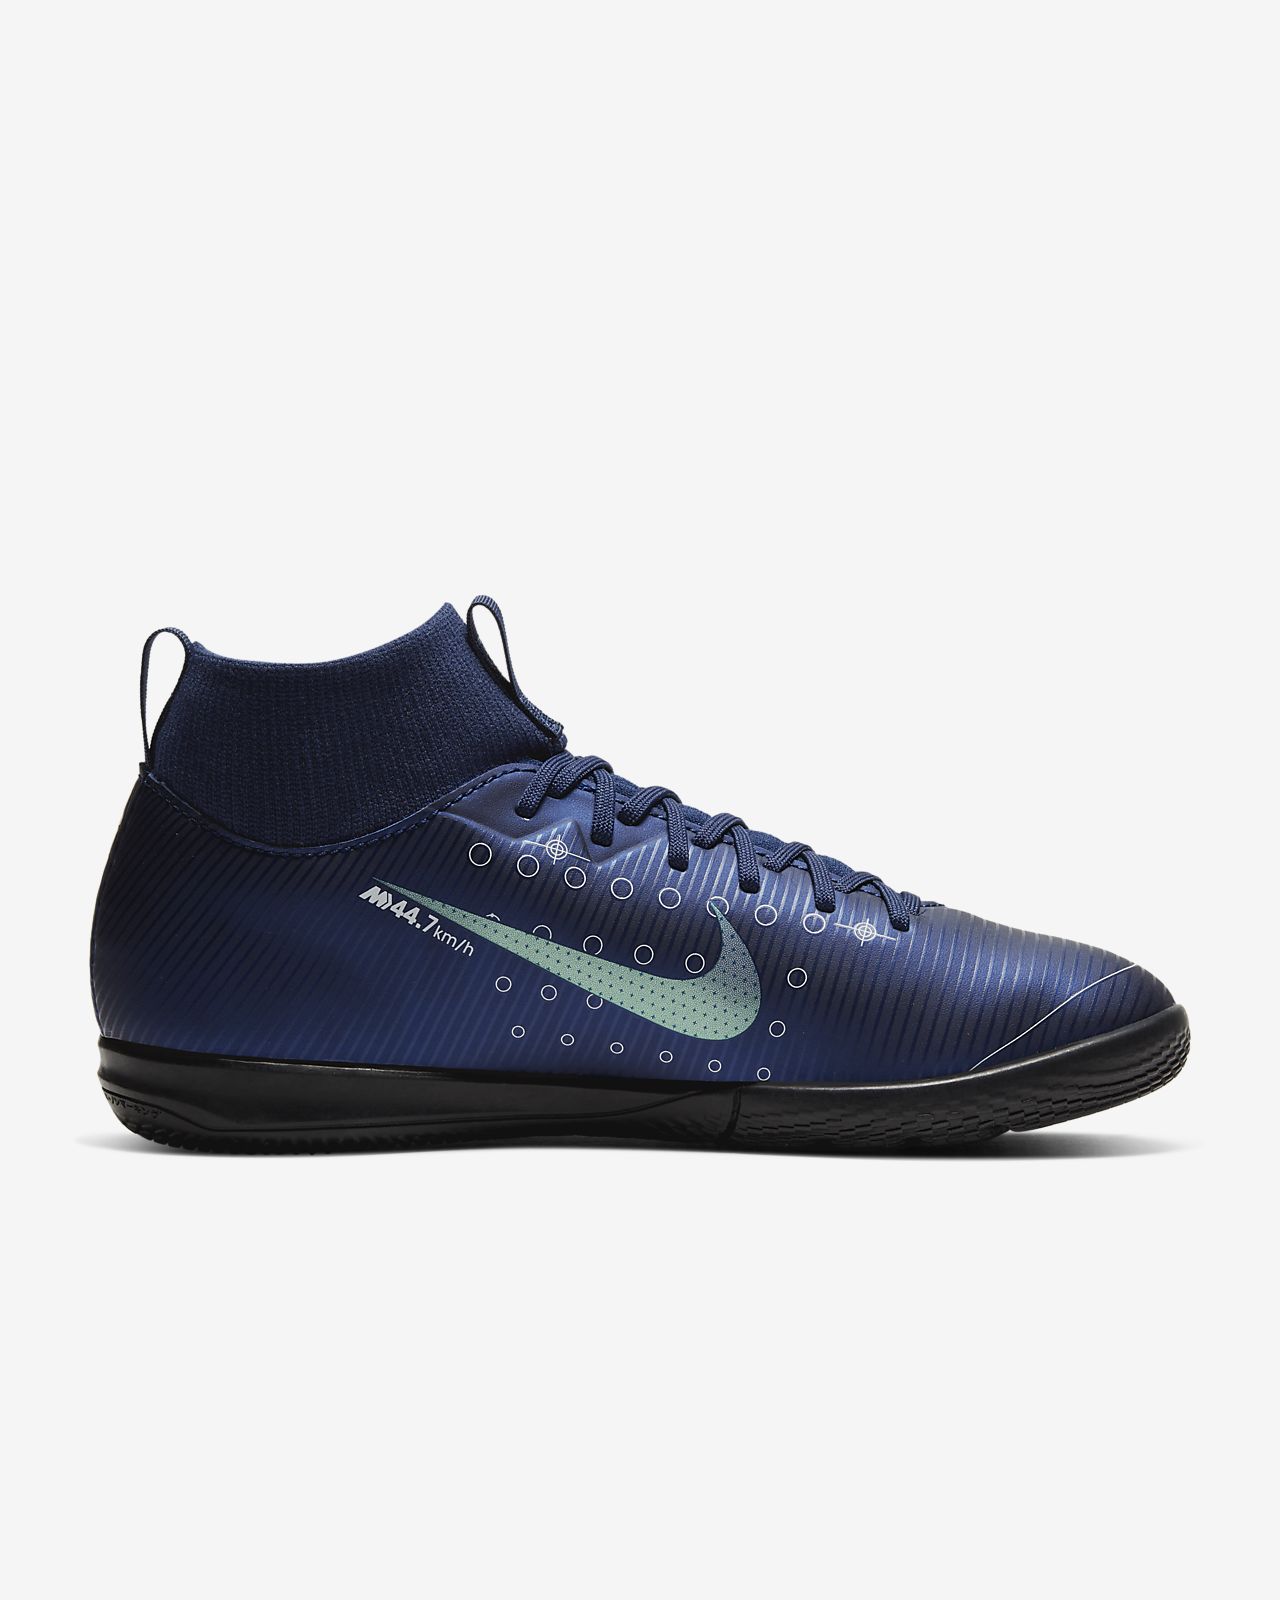 Nike jr. Mercurial Superfly 7 Academy AG Younger.